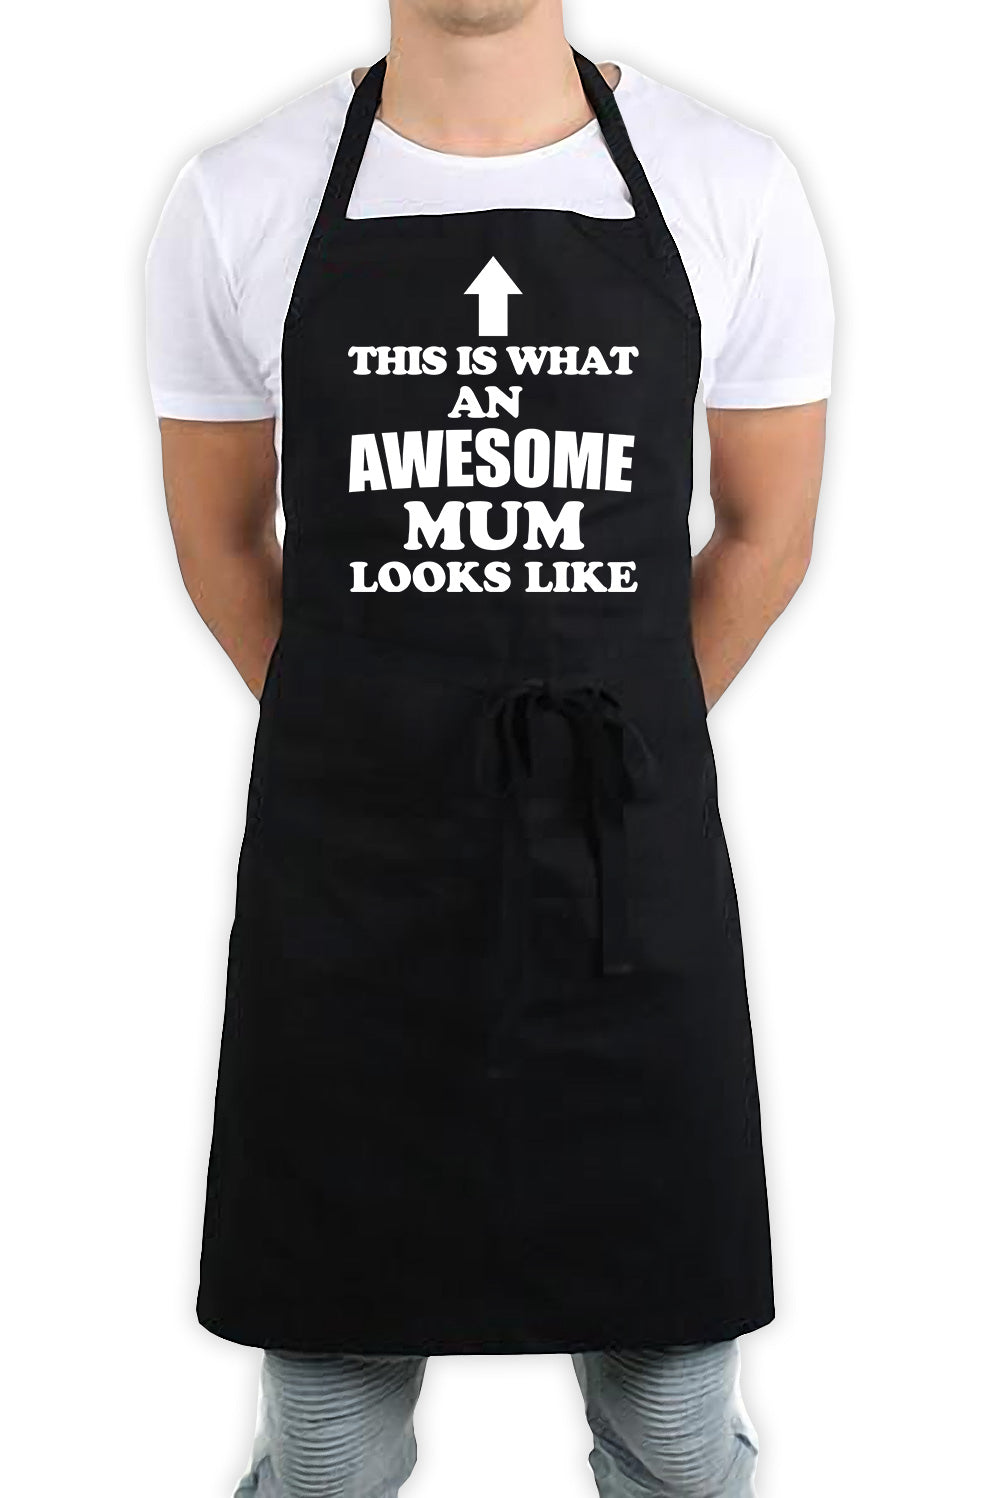 This Is What An Awesome Mum Looks Like Funny Kitchen BBQ Apron Black